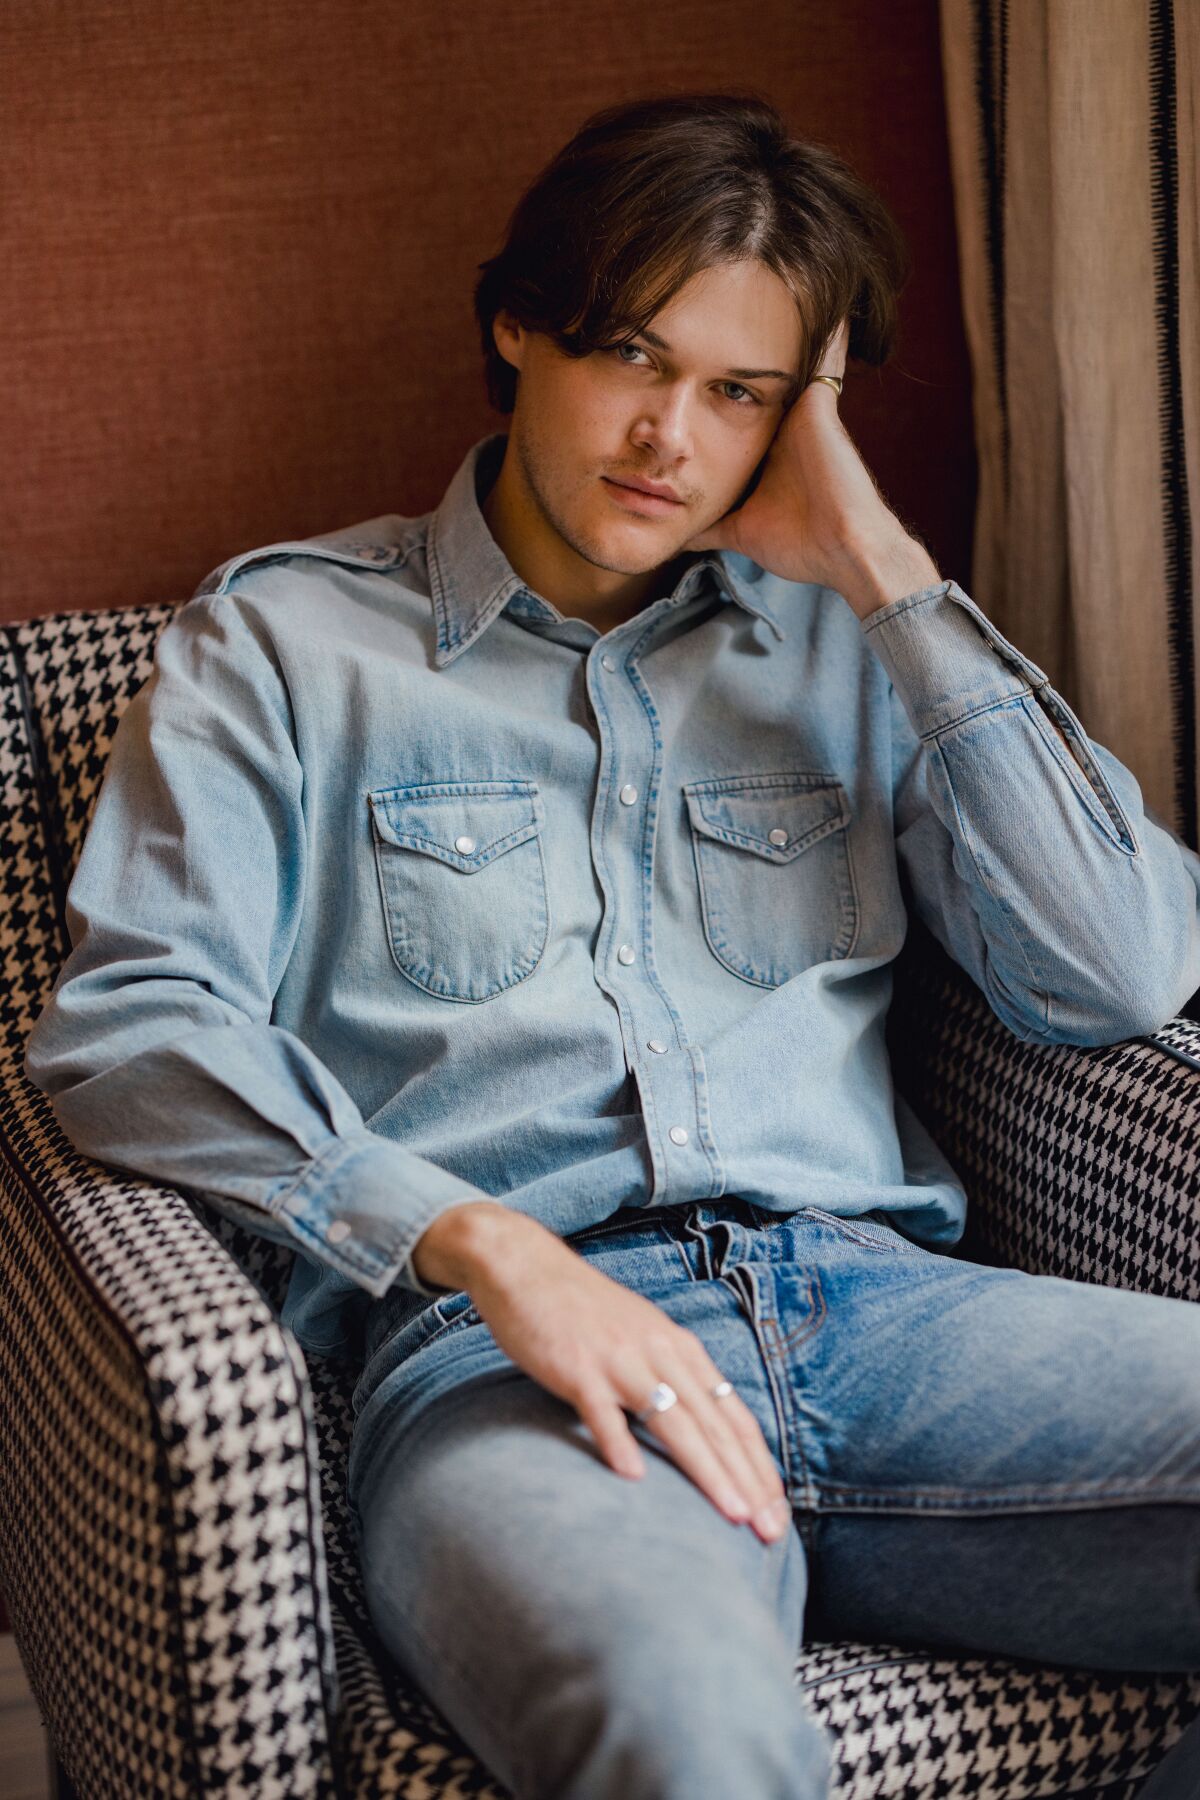 Christopher Briney in a denim shirt and jeans sits a chair.